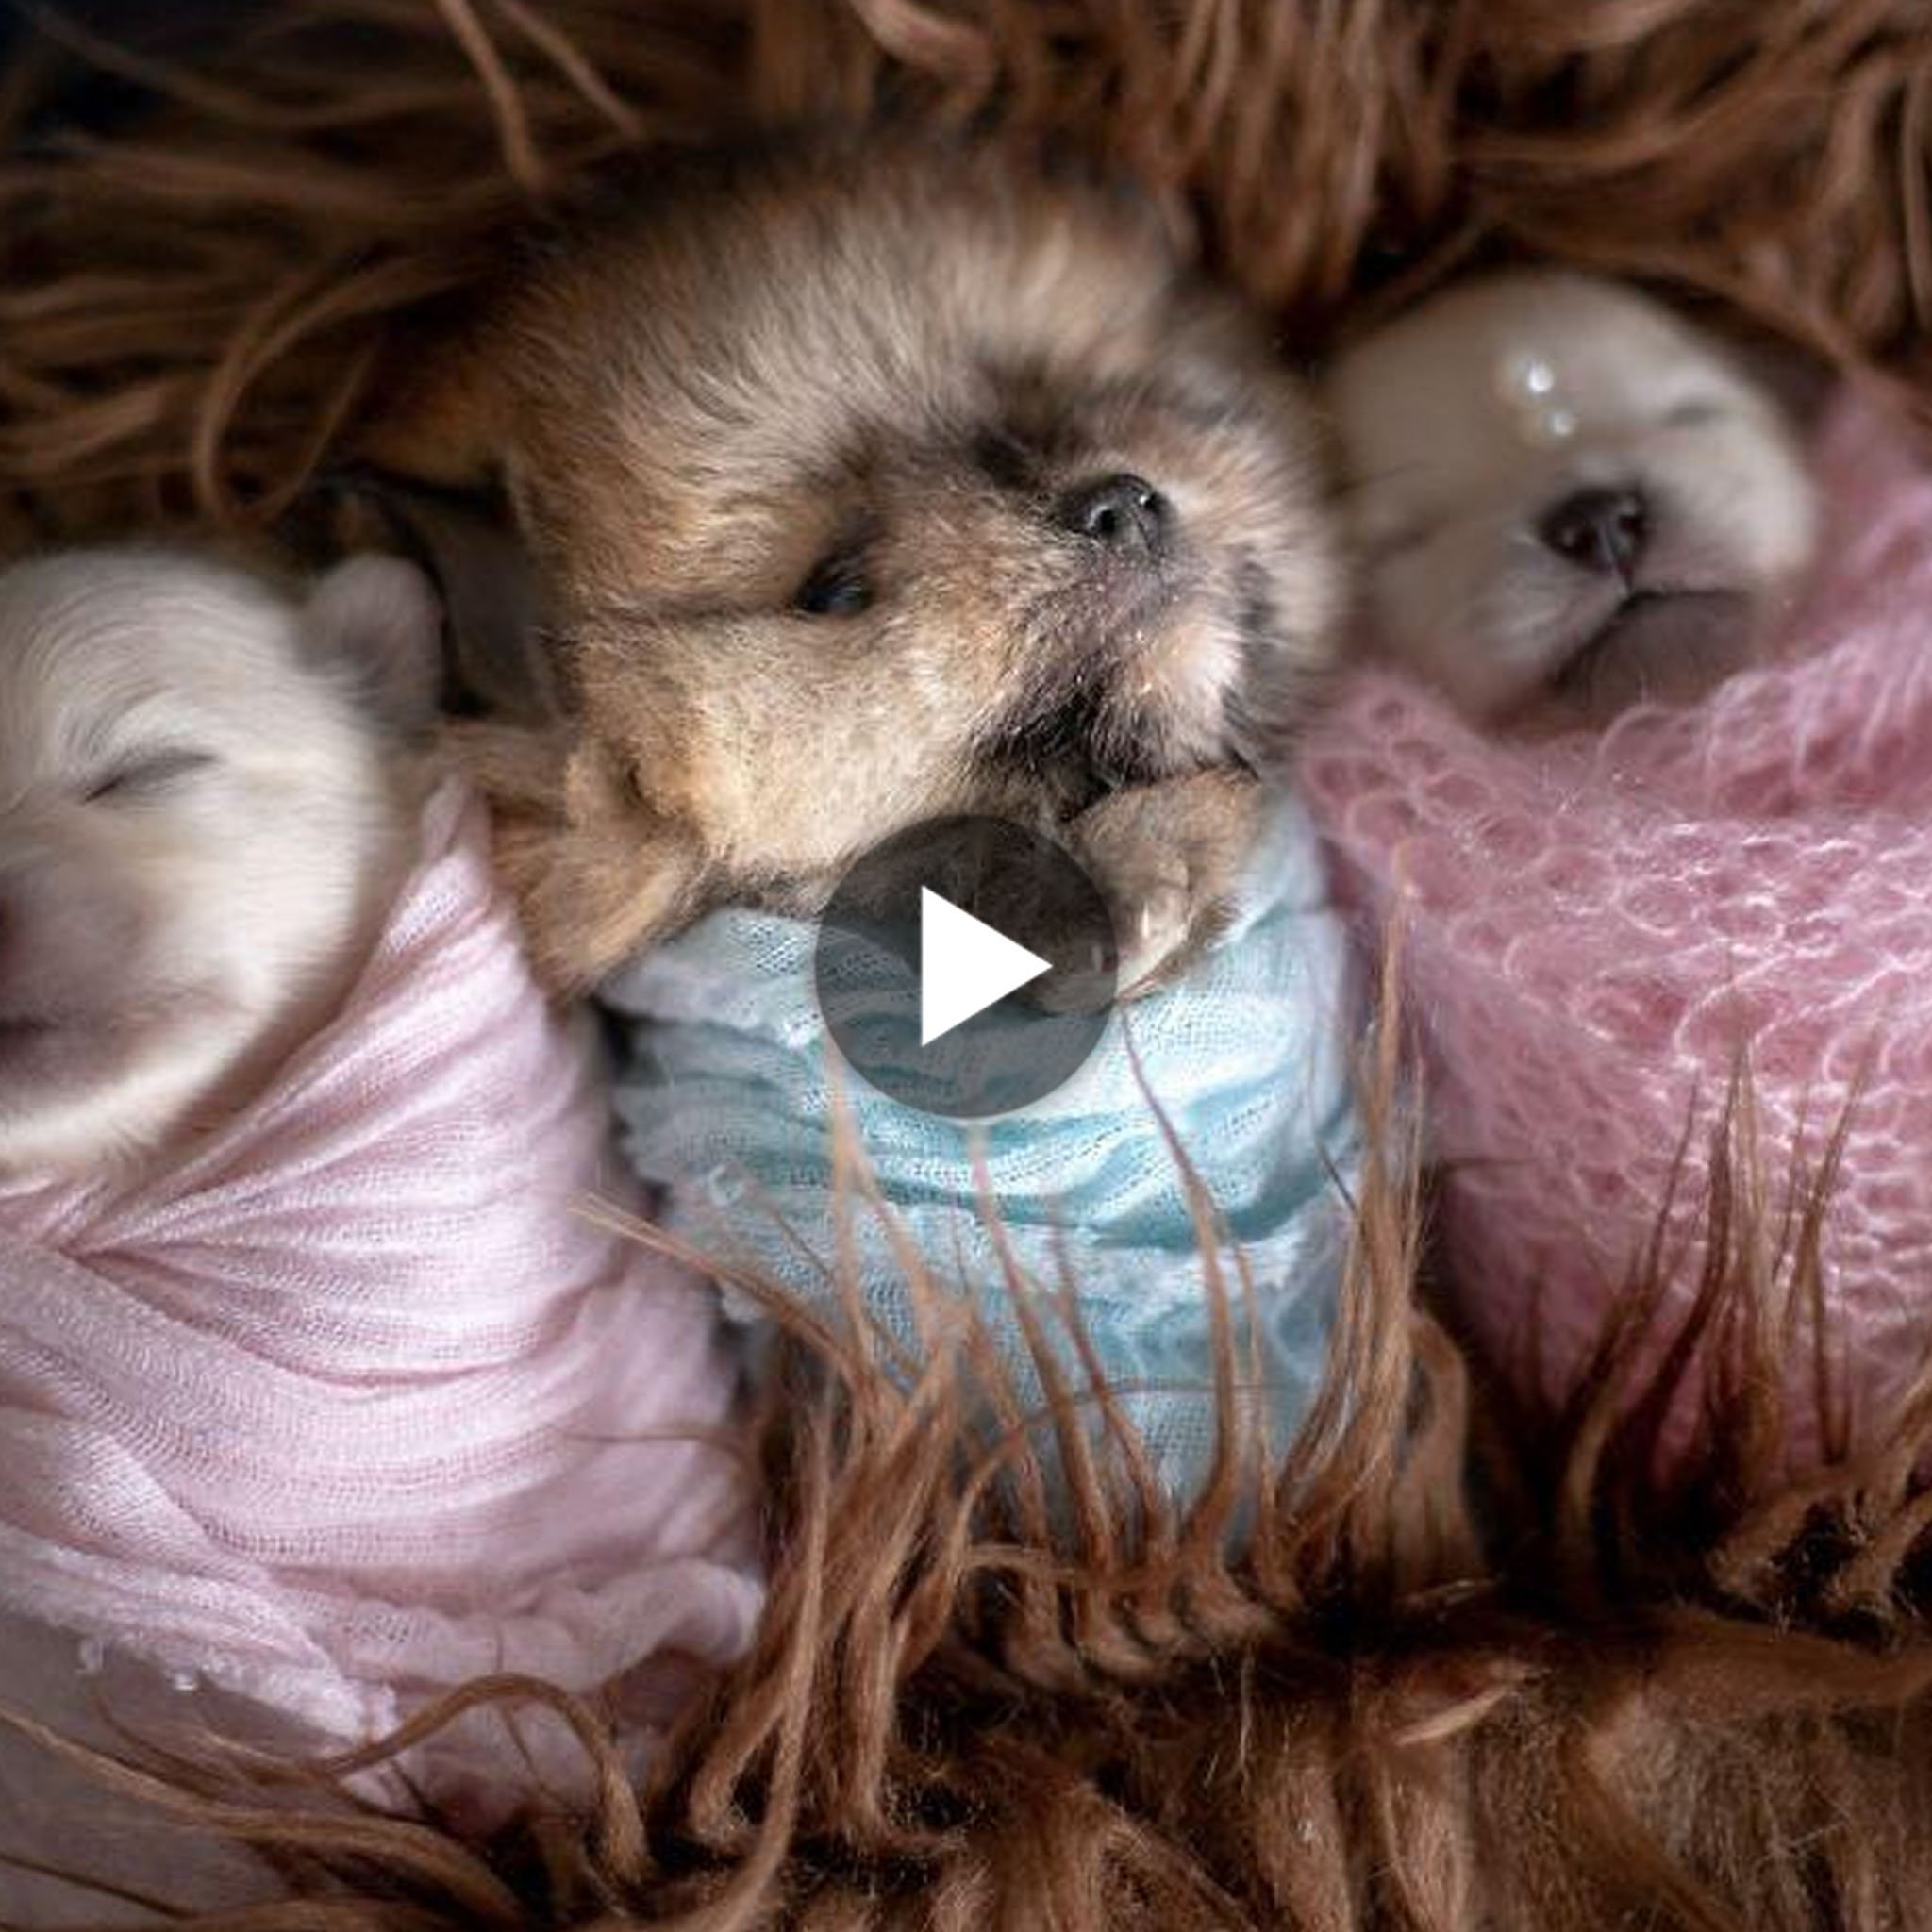 tho “Photographer’s Joy: Brazilian Lensman Captures Heartwarming Newborn Puppy Photoshoot, Kindling Warmth in Hearts. Delights Netizens as They Witness the Cuteness” tho